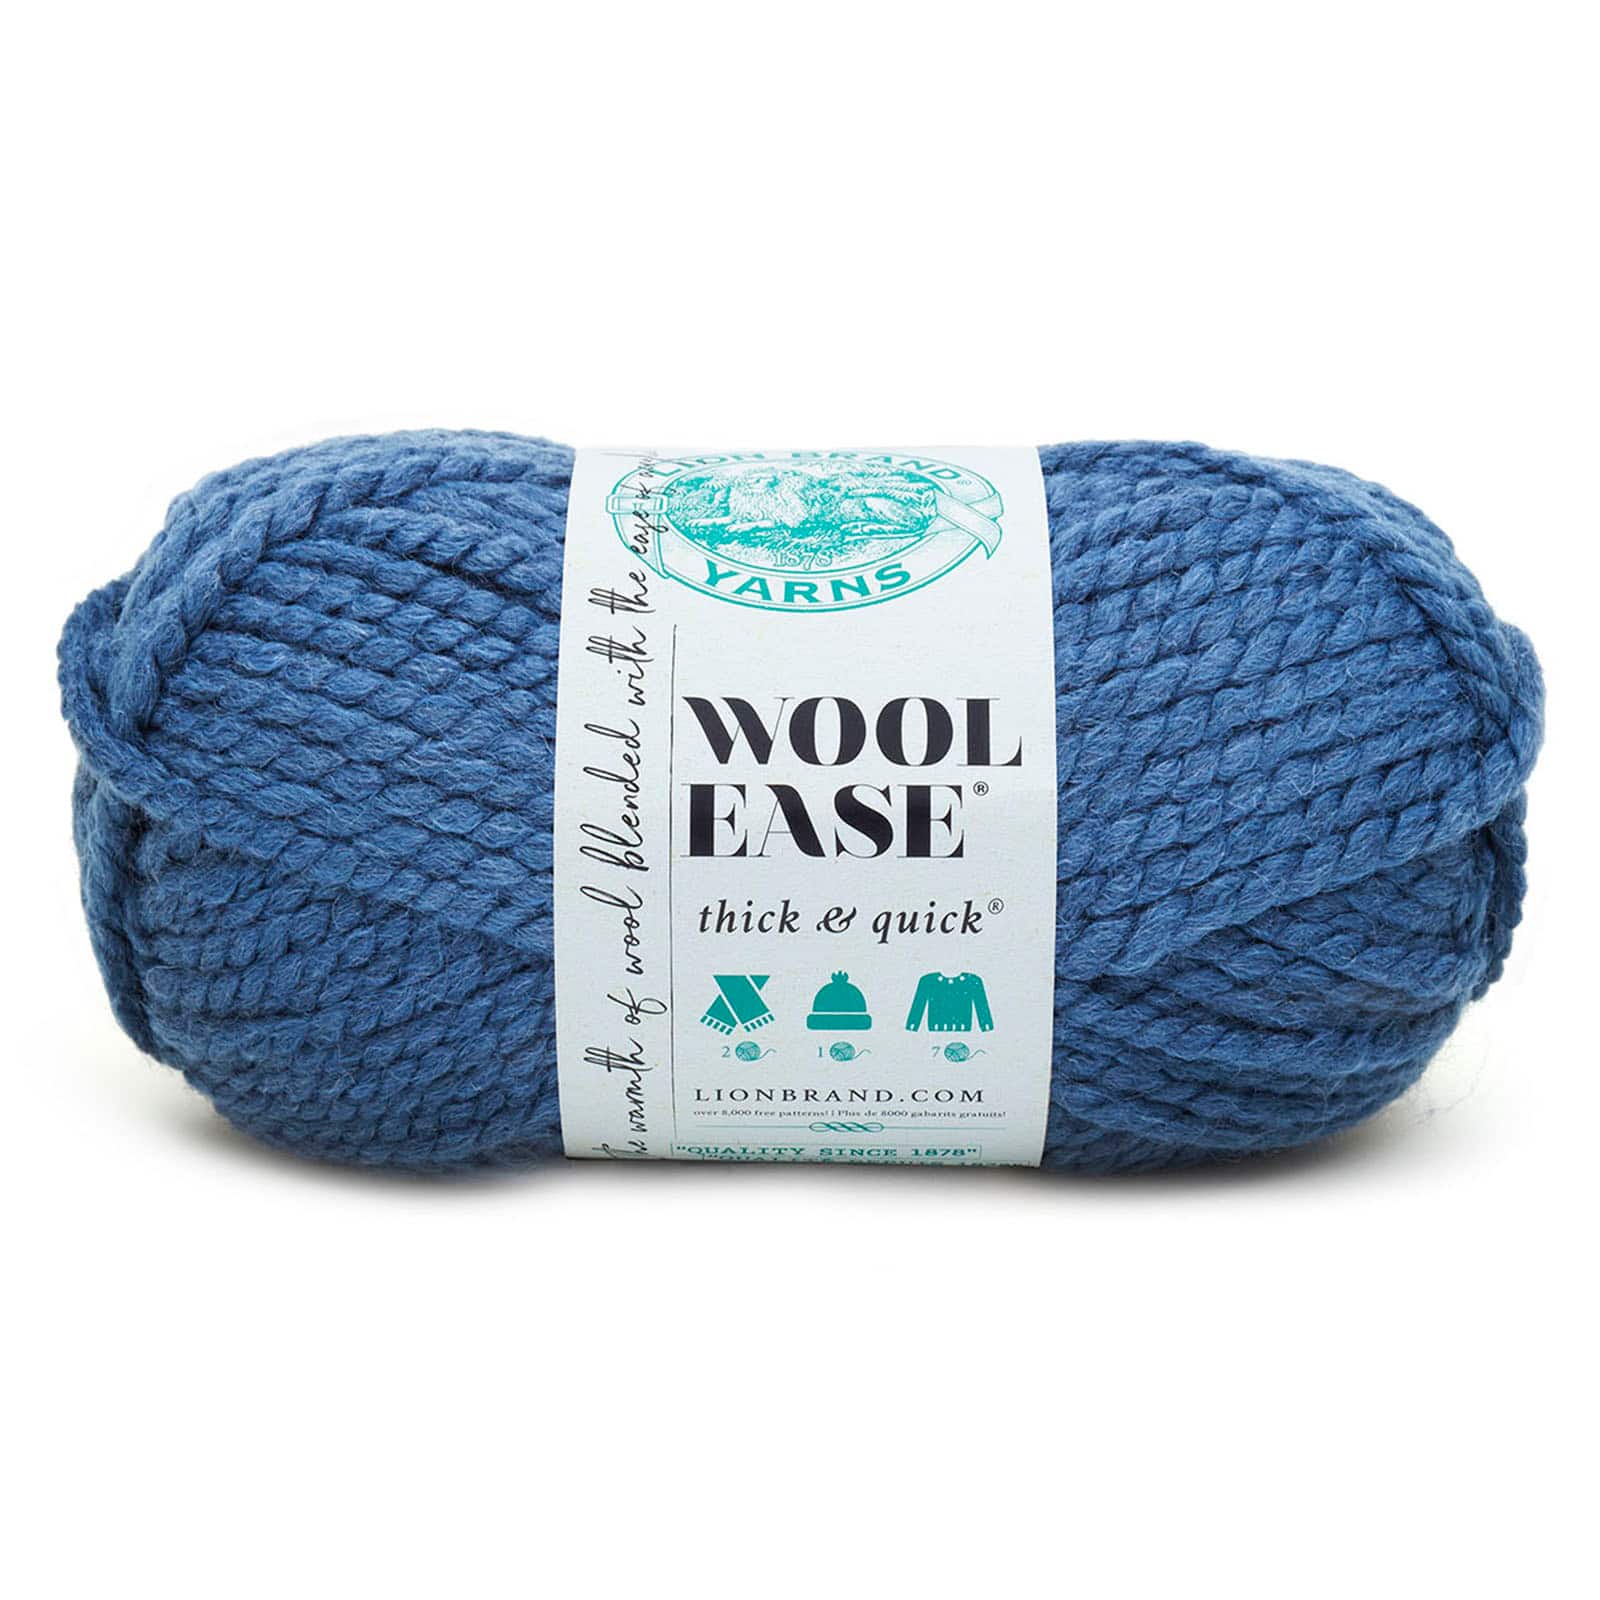  Lion Brand Wool-Ease Thick & Quick Yarn Thaw